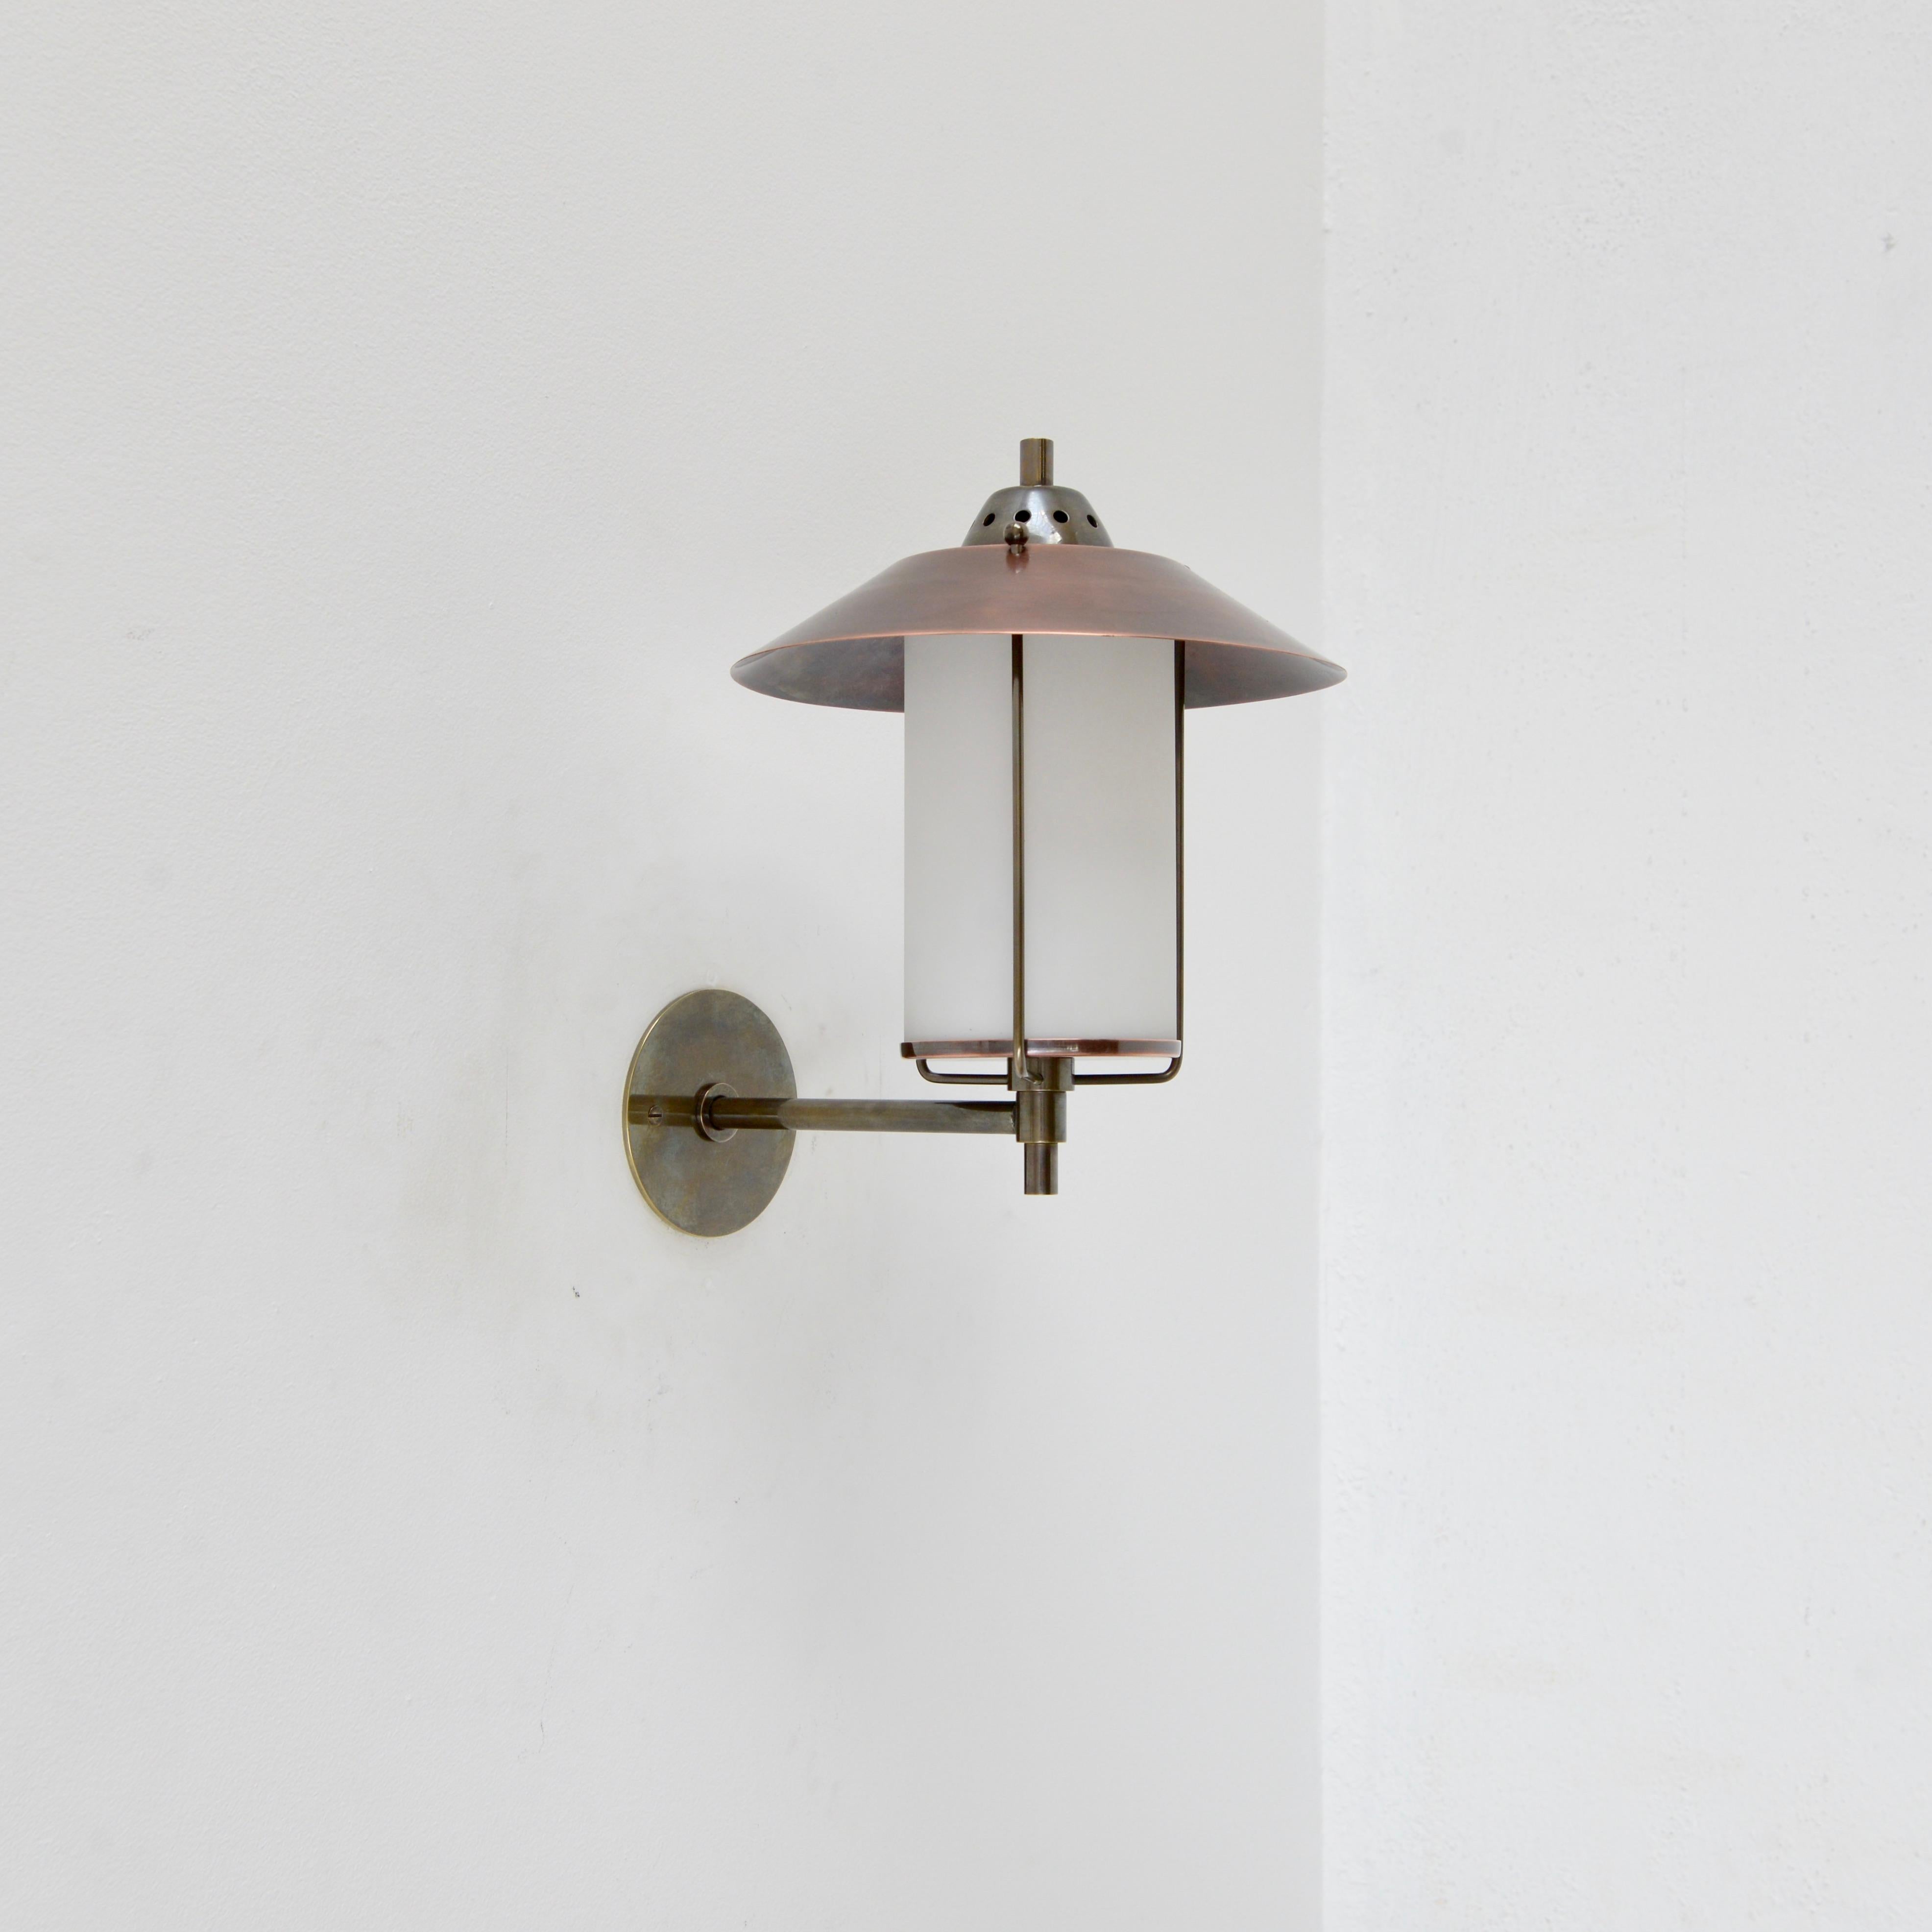 Part of Lumfardo Luminaries contemporary collection, the LUntern Outdoor sconce is a classic Mid-Century Modern design made to order. Crafted from copper, brass and glass, this fixture can be wired for any worldwide standard. Single E26 medium based